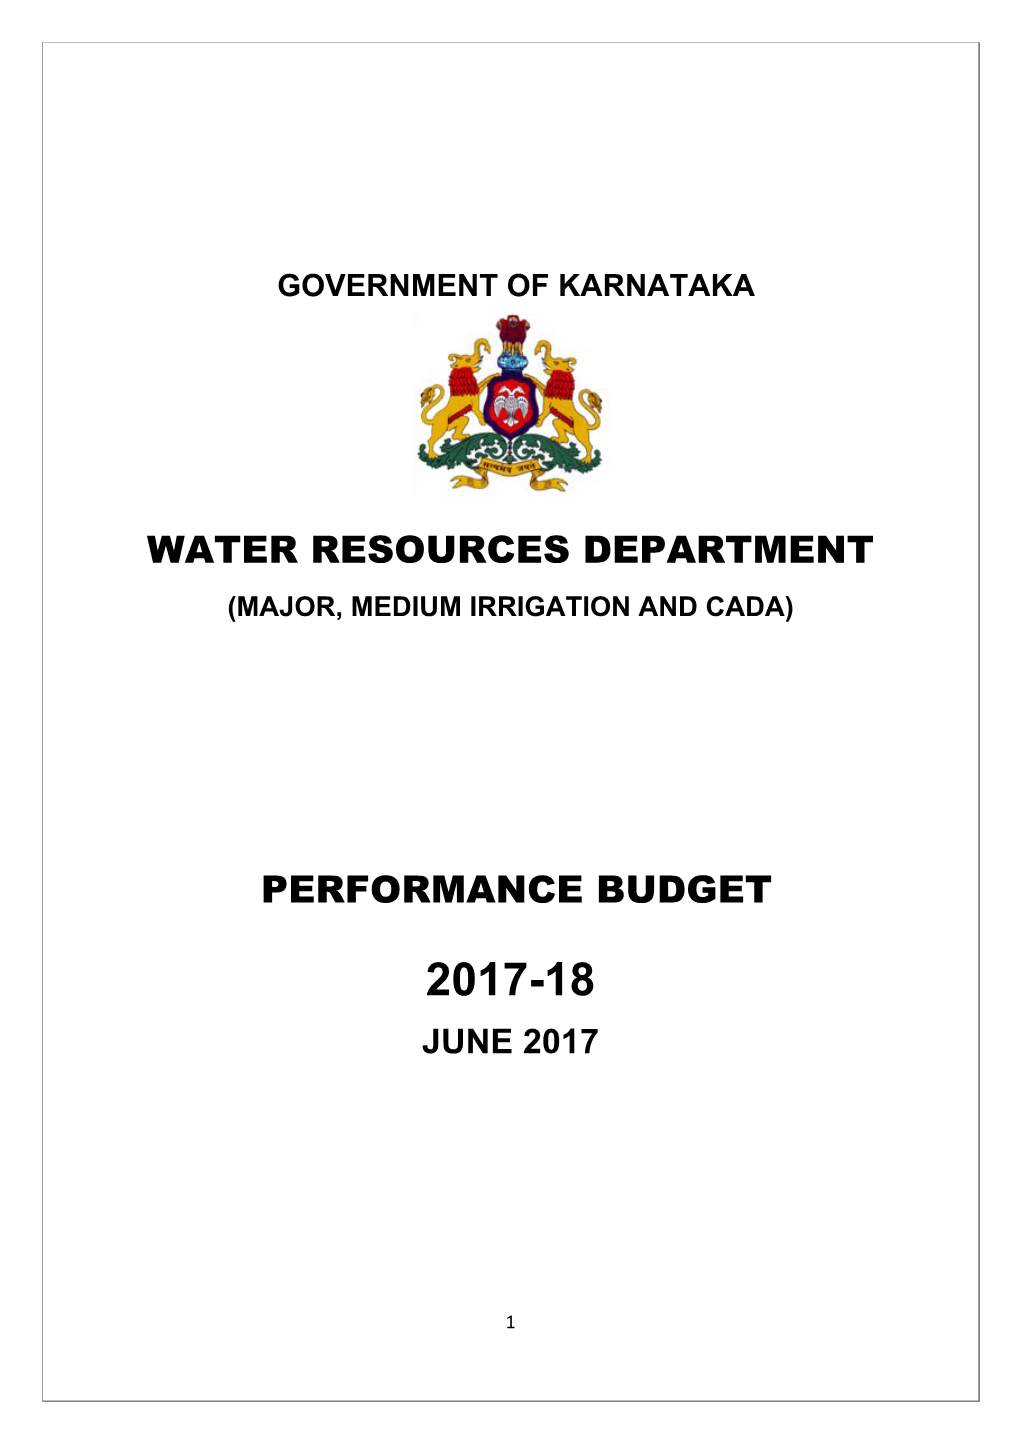 Water Resources Department Performance Budget